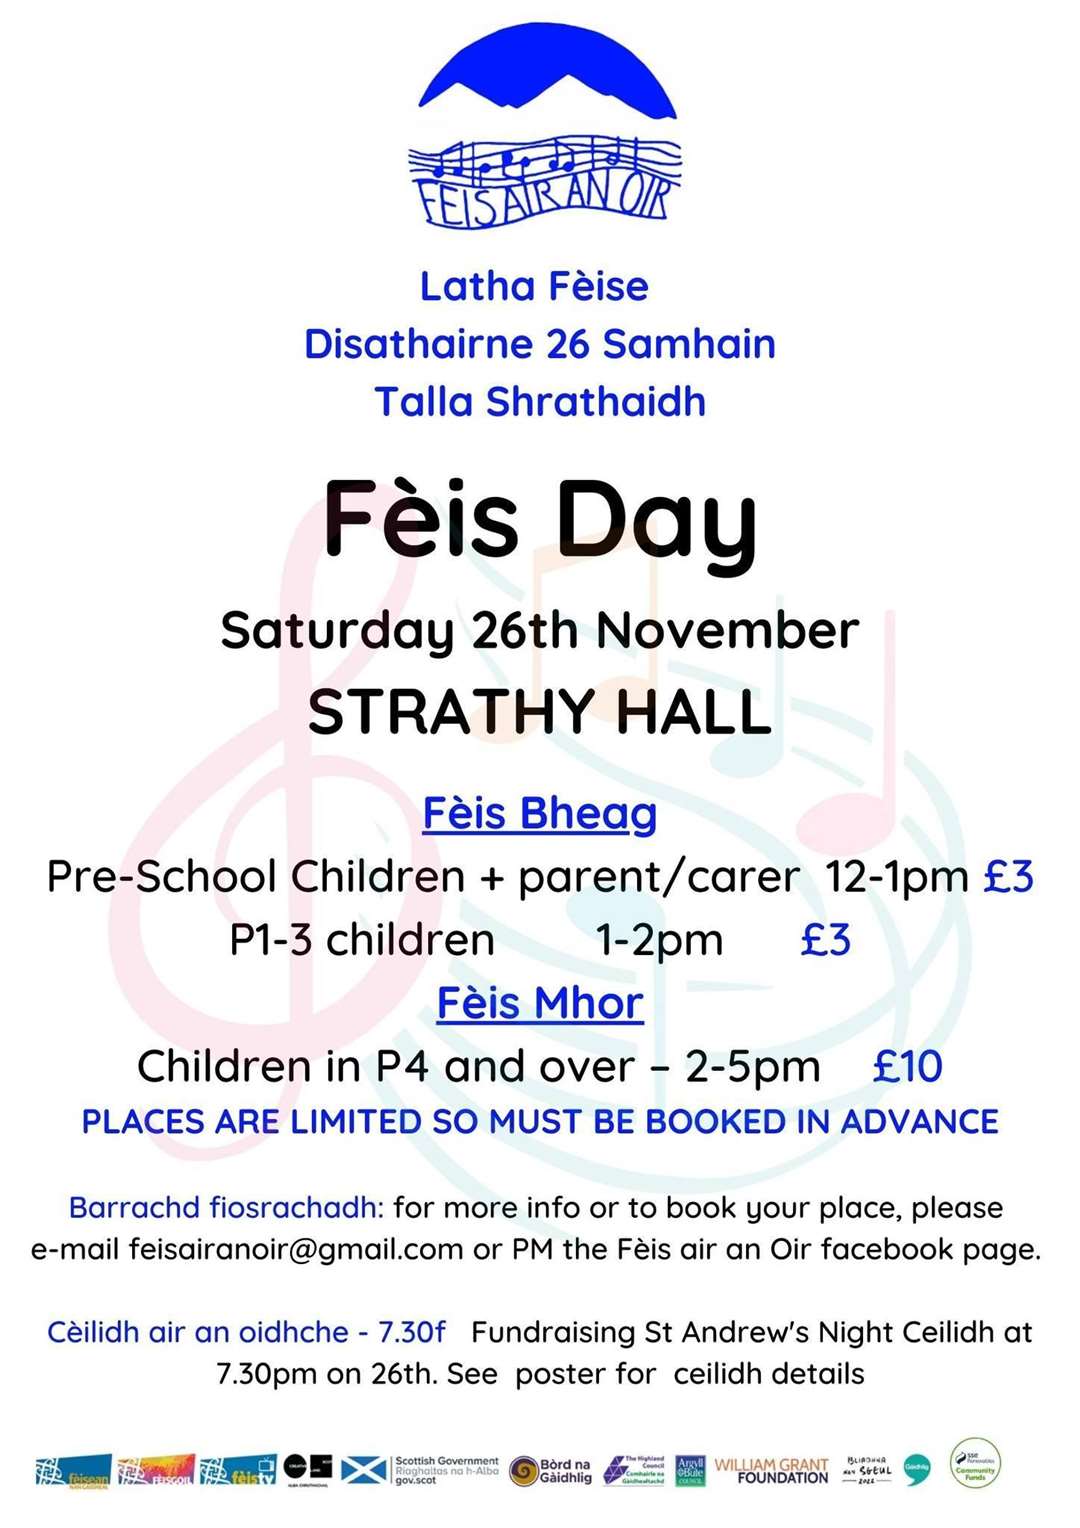 The venue for the Fèis Day is Strathy Hall.